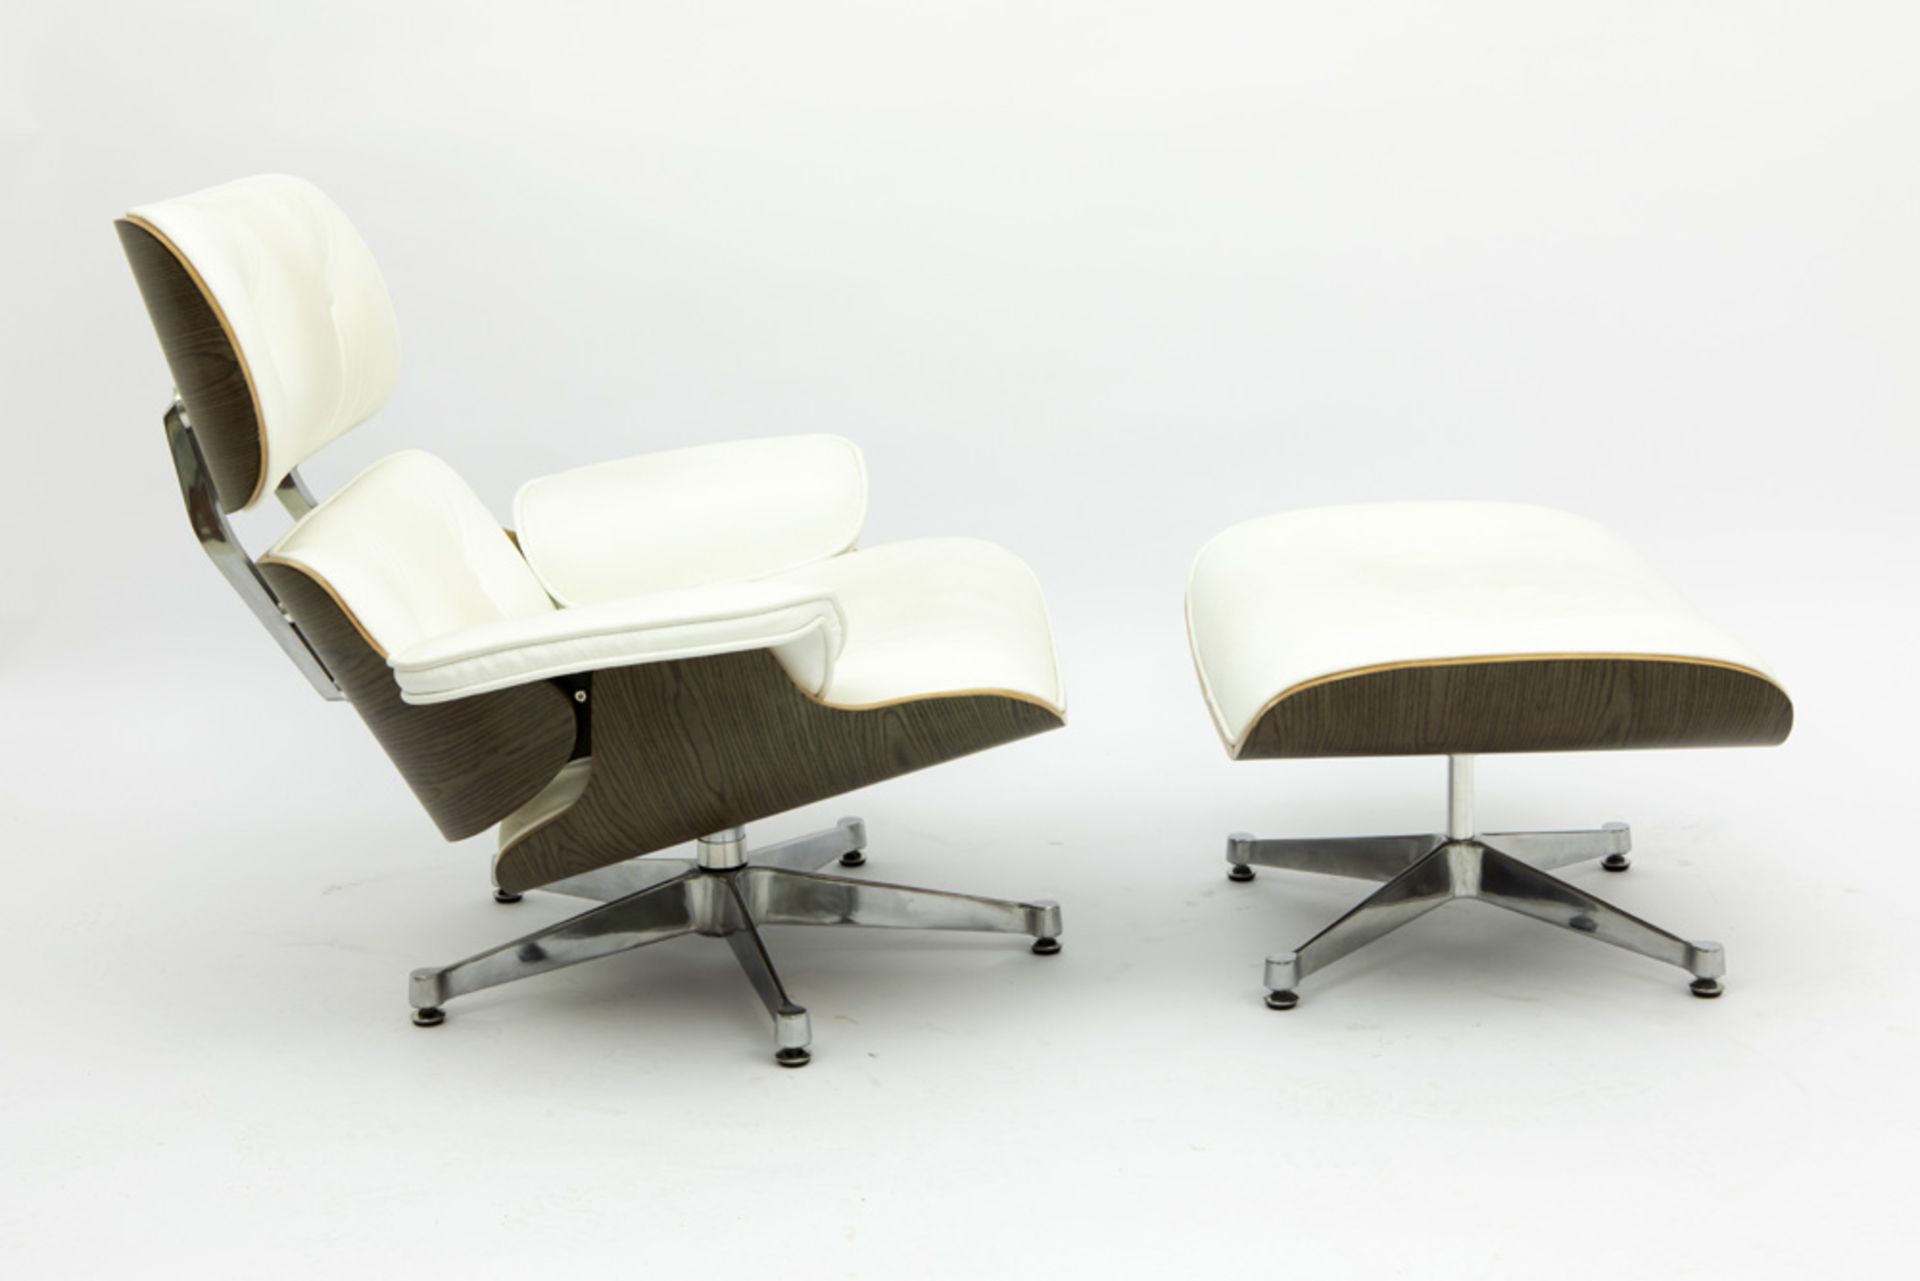 set of lounge chair and ottoman after the famous design by Charles & Ray Eames in white leather, - Image 2 of 3